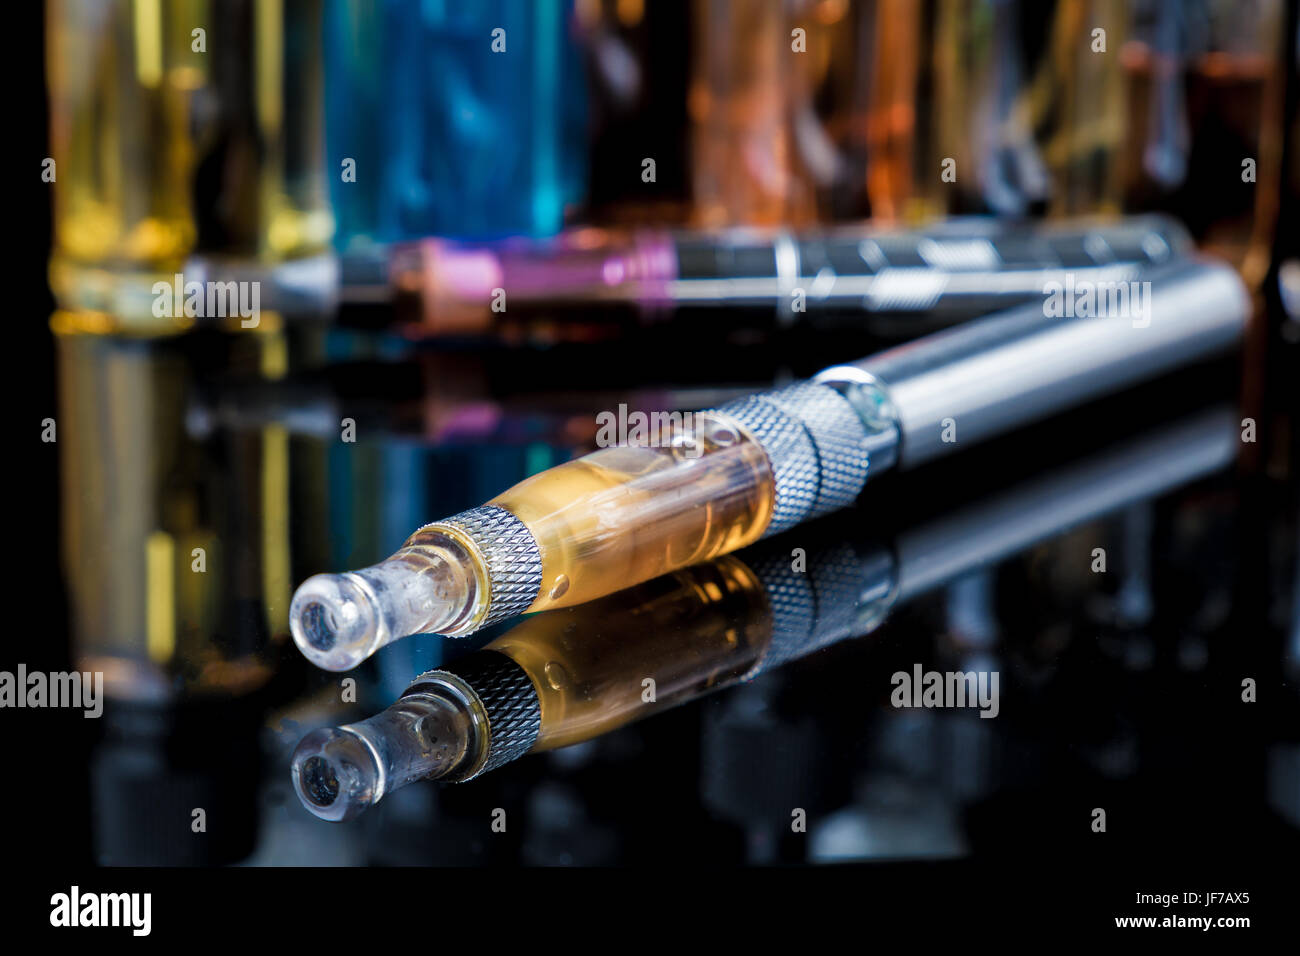 Electronic cigarette with e-liquid bottles in background Stock Photo